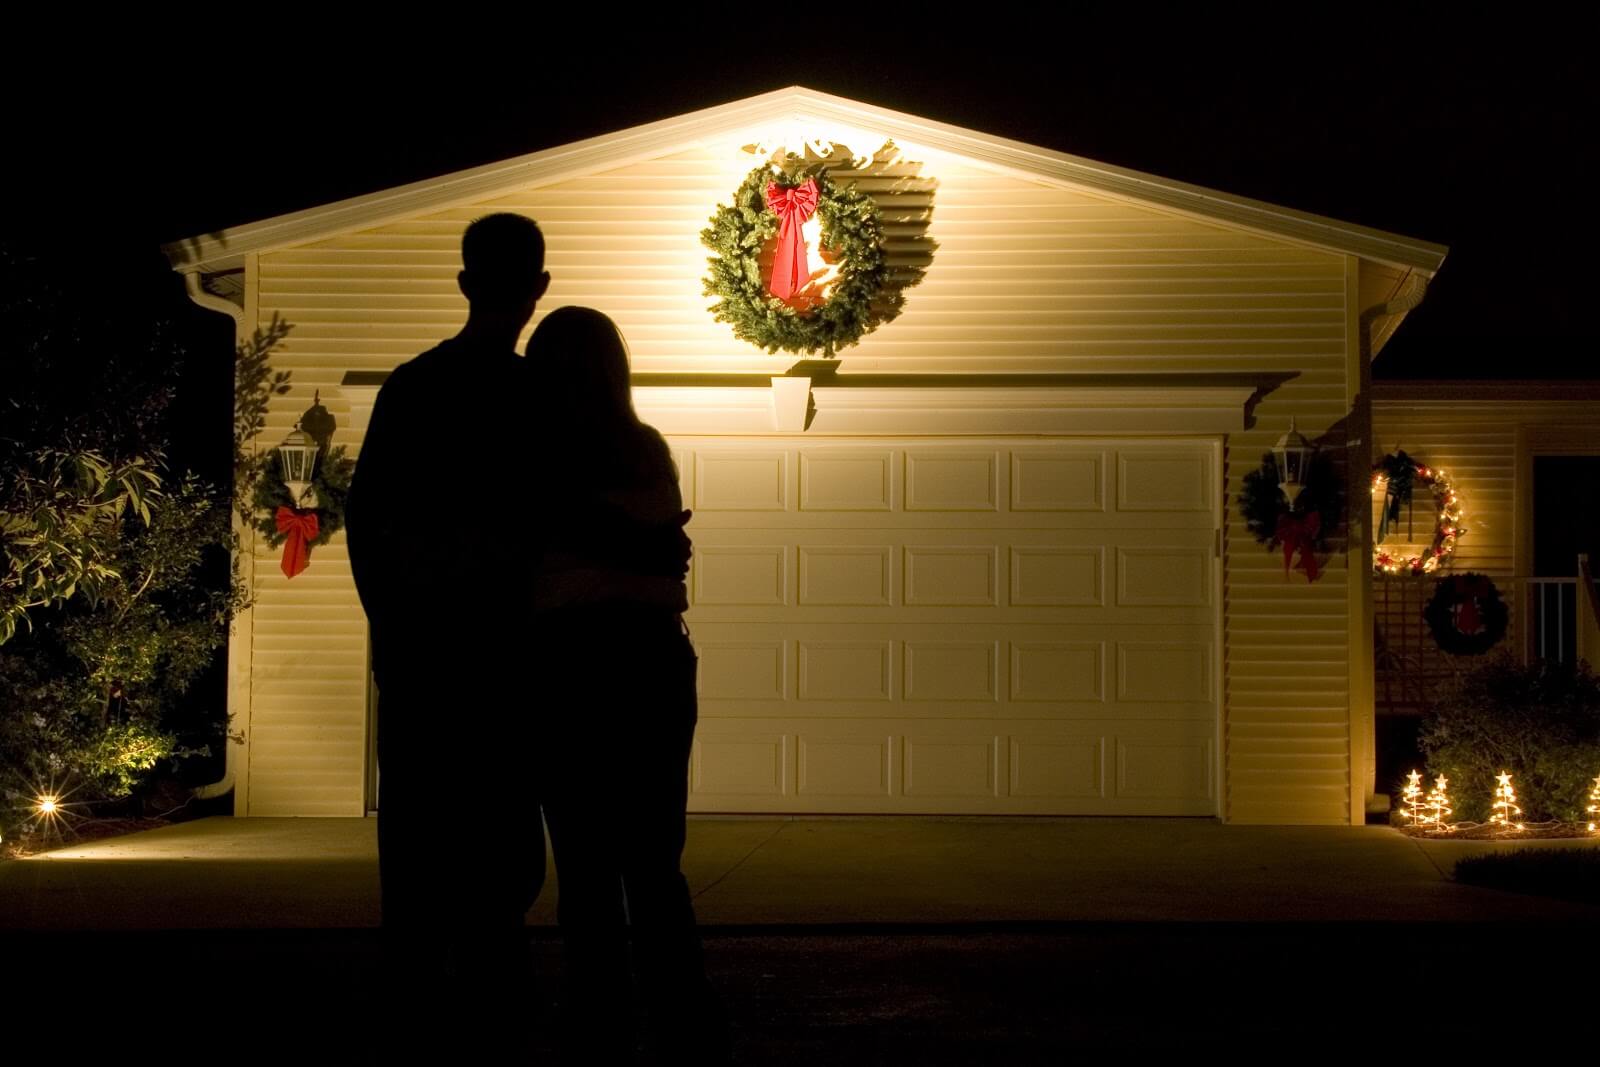 a couple admiring their garage door decorated with a wreath